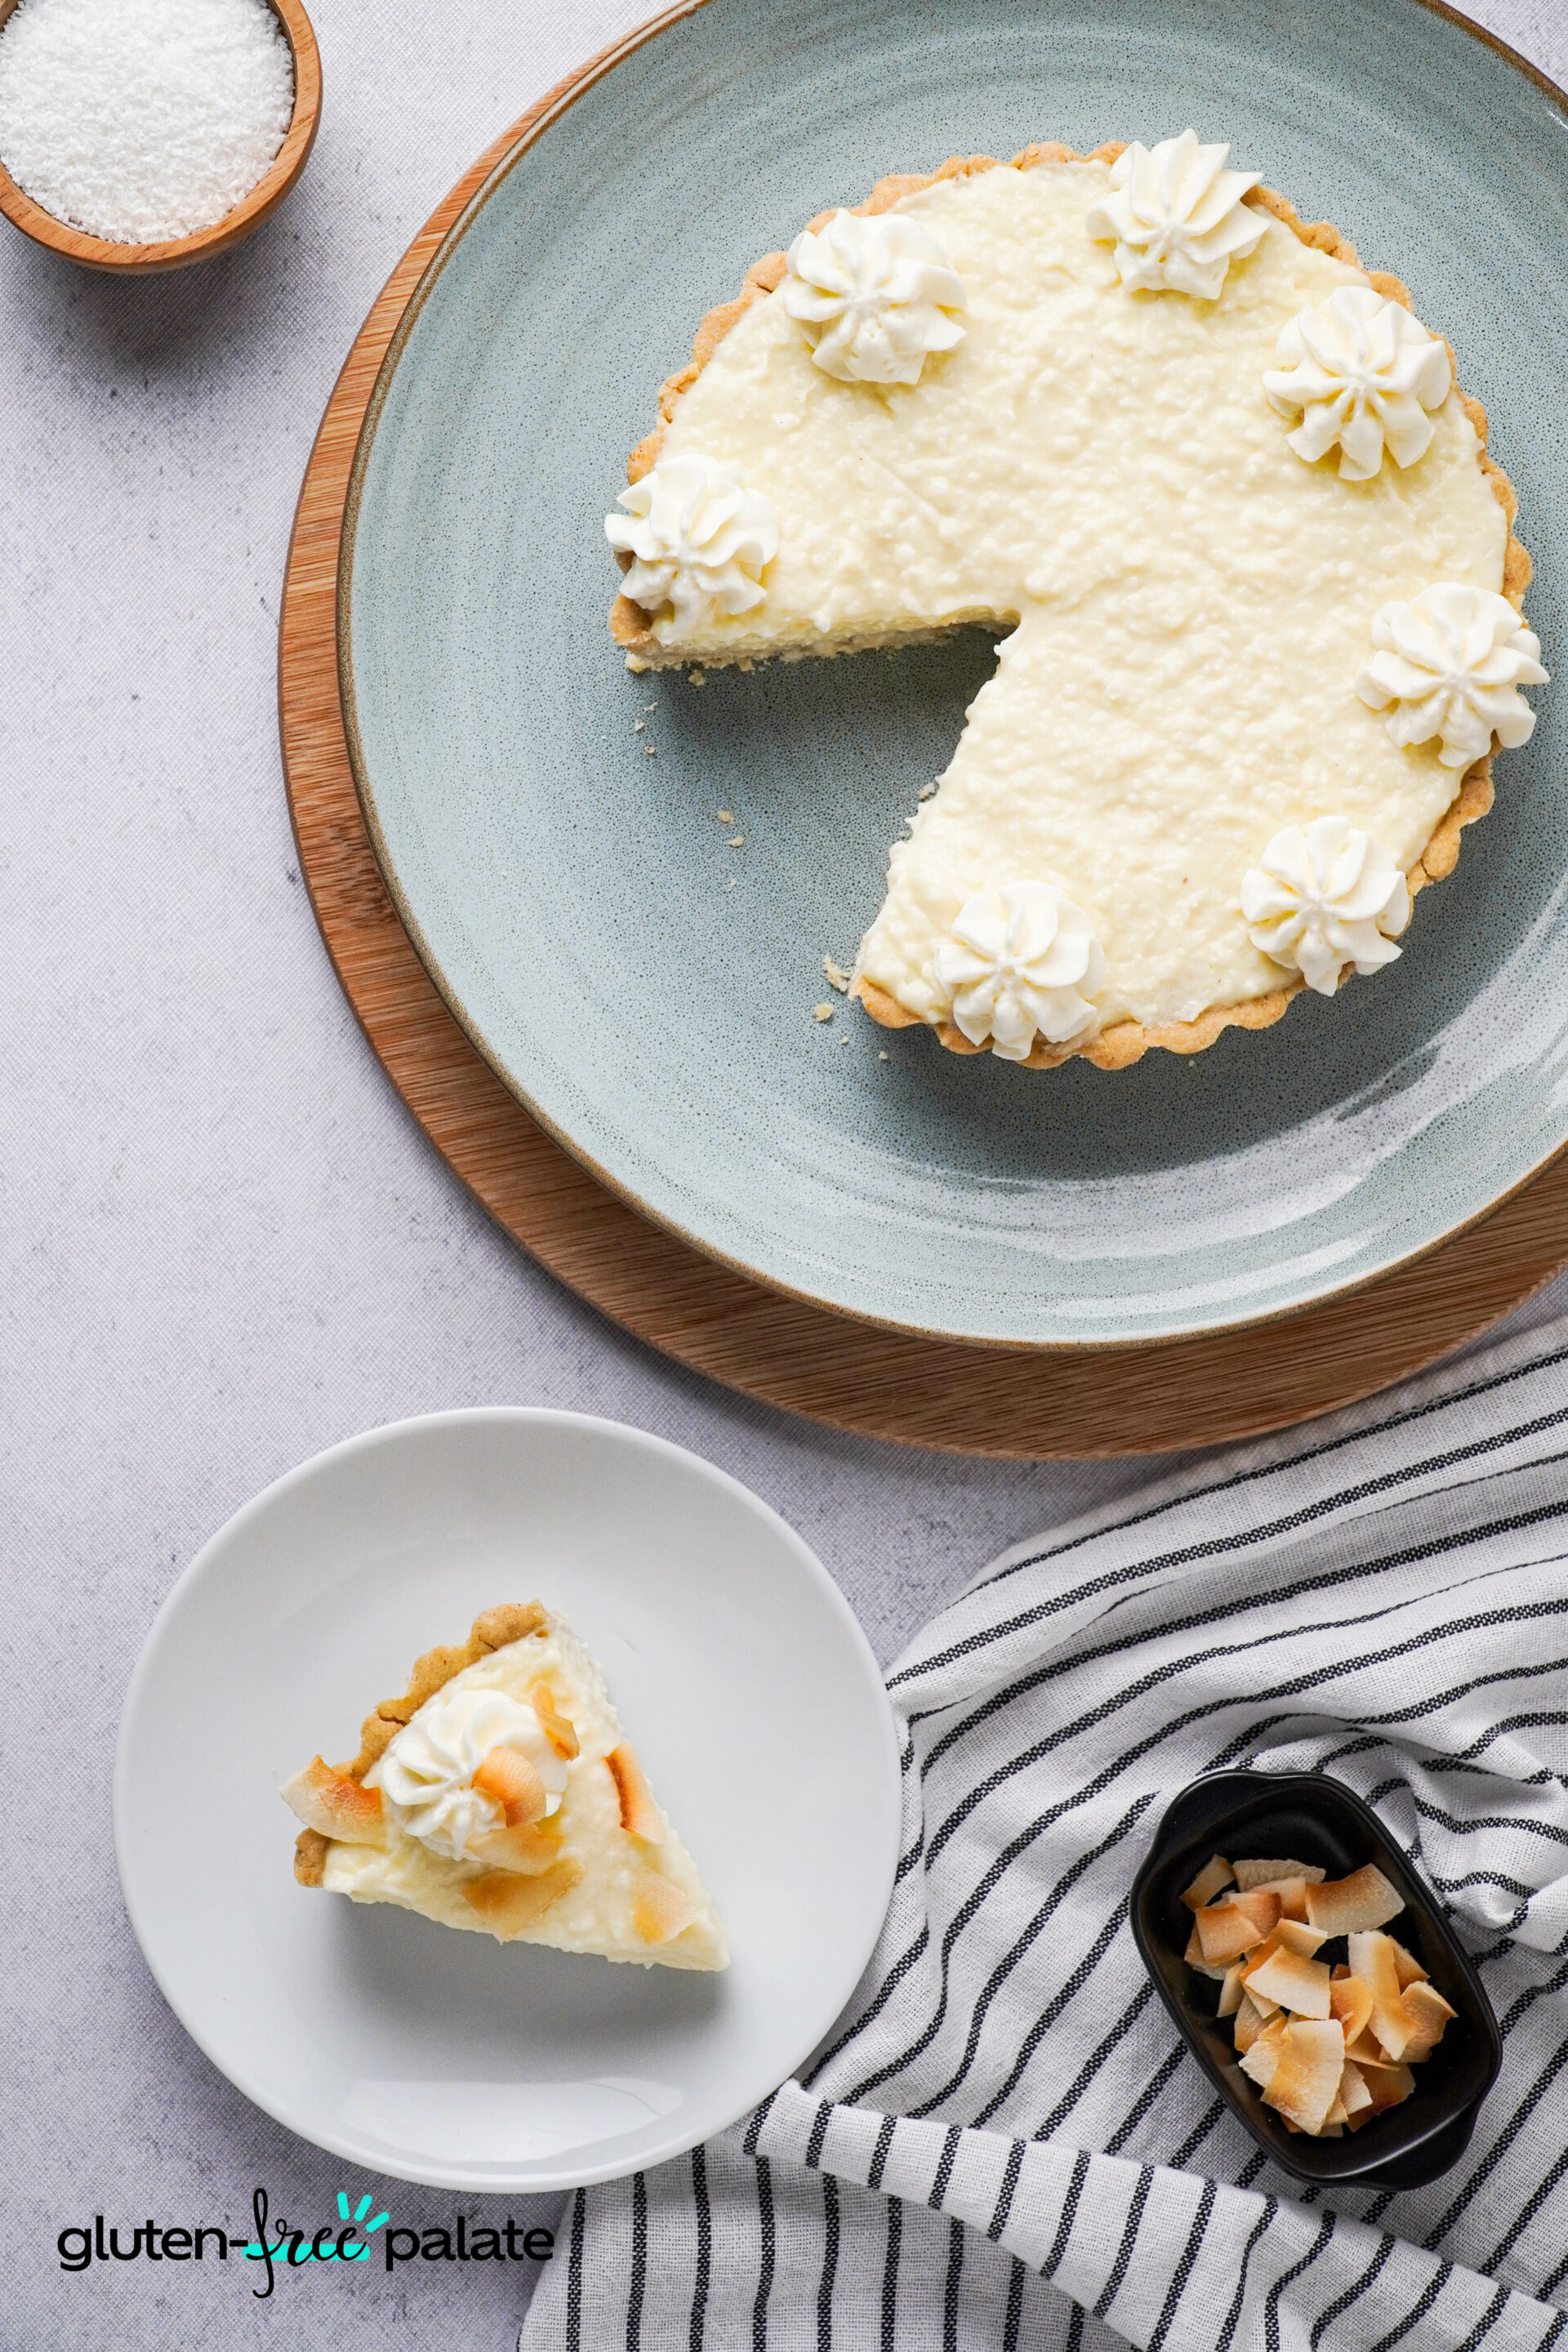 Gluten-free coconut cream pie on a cake plate and another slice in a side plate.